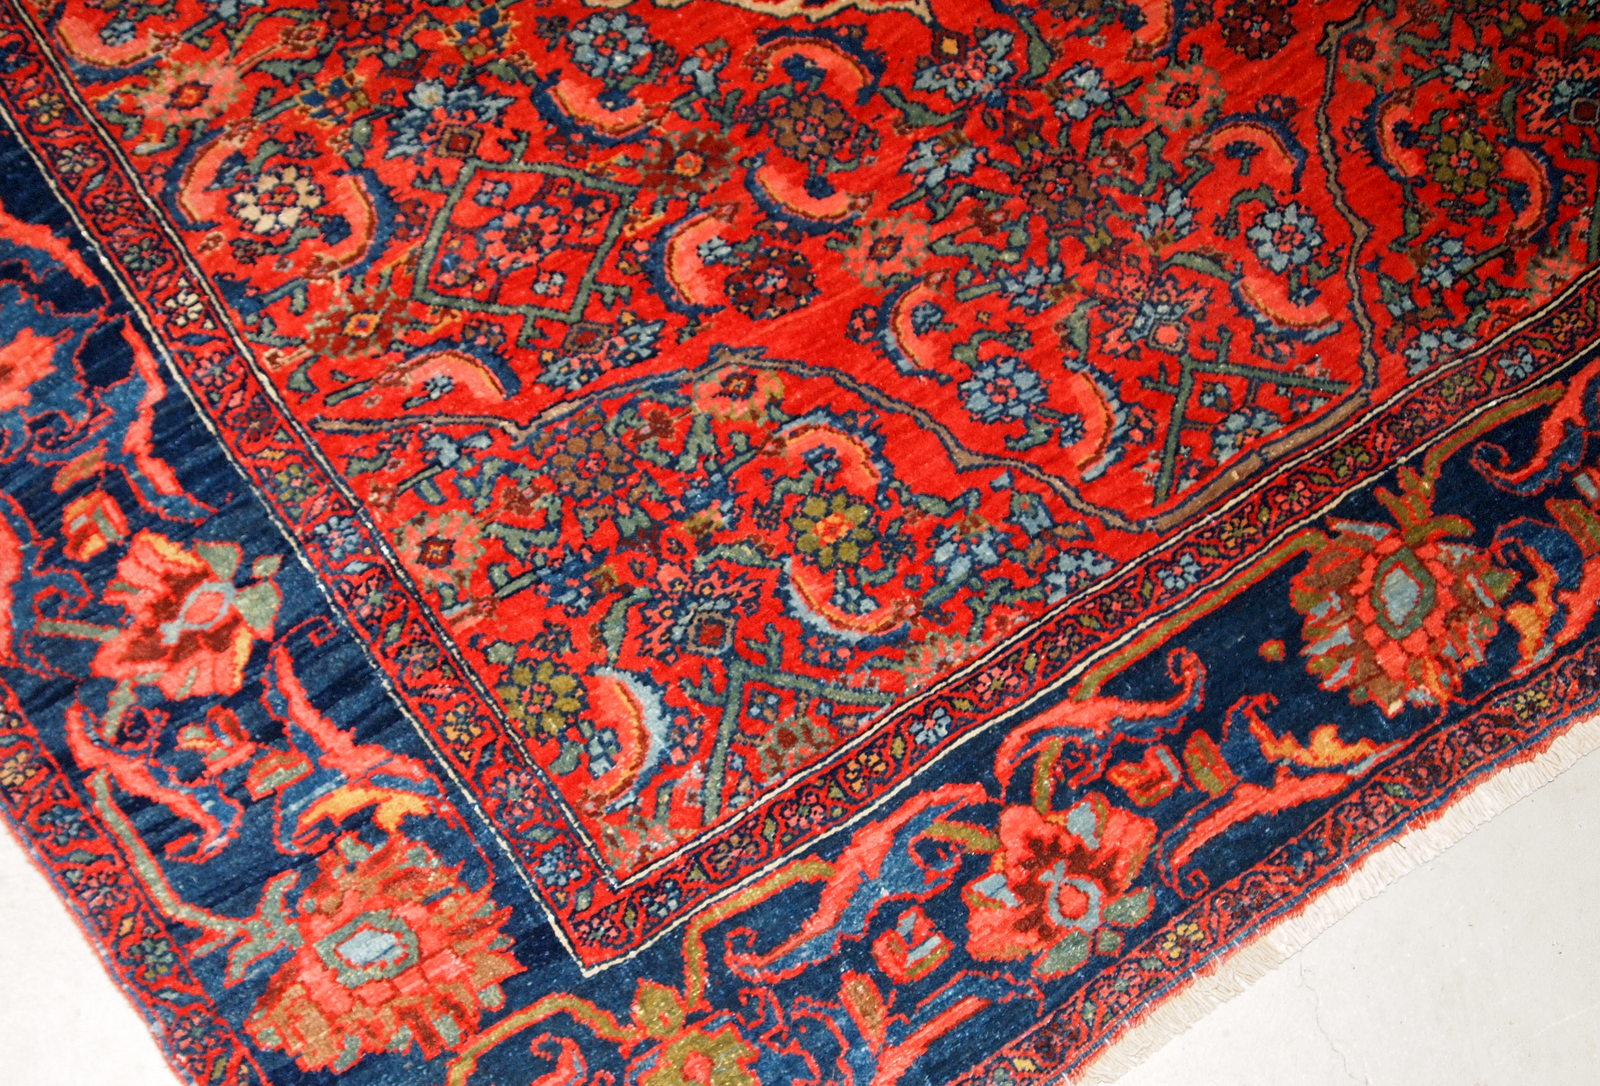 Handmade antique Bidjar rug from the beginning of 20th century. The rug is in original good condition made in bright red wool.